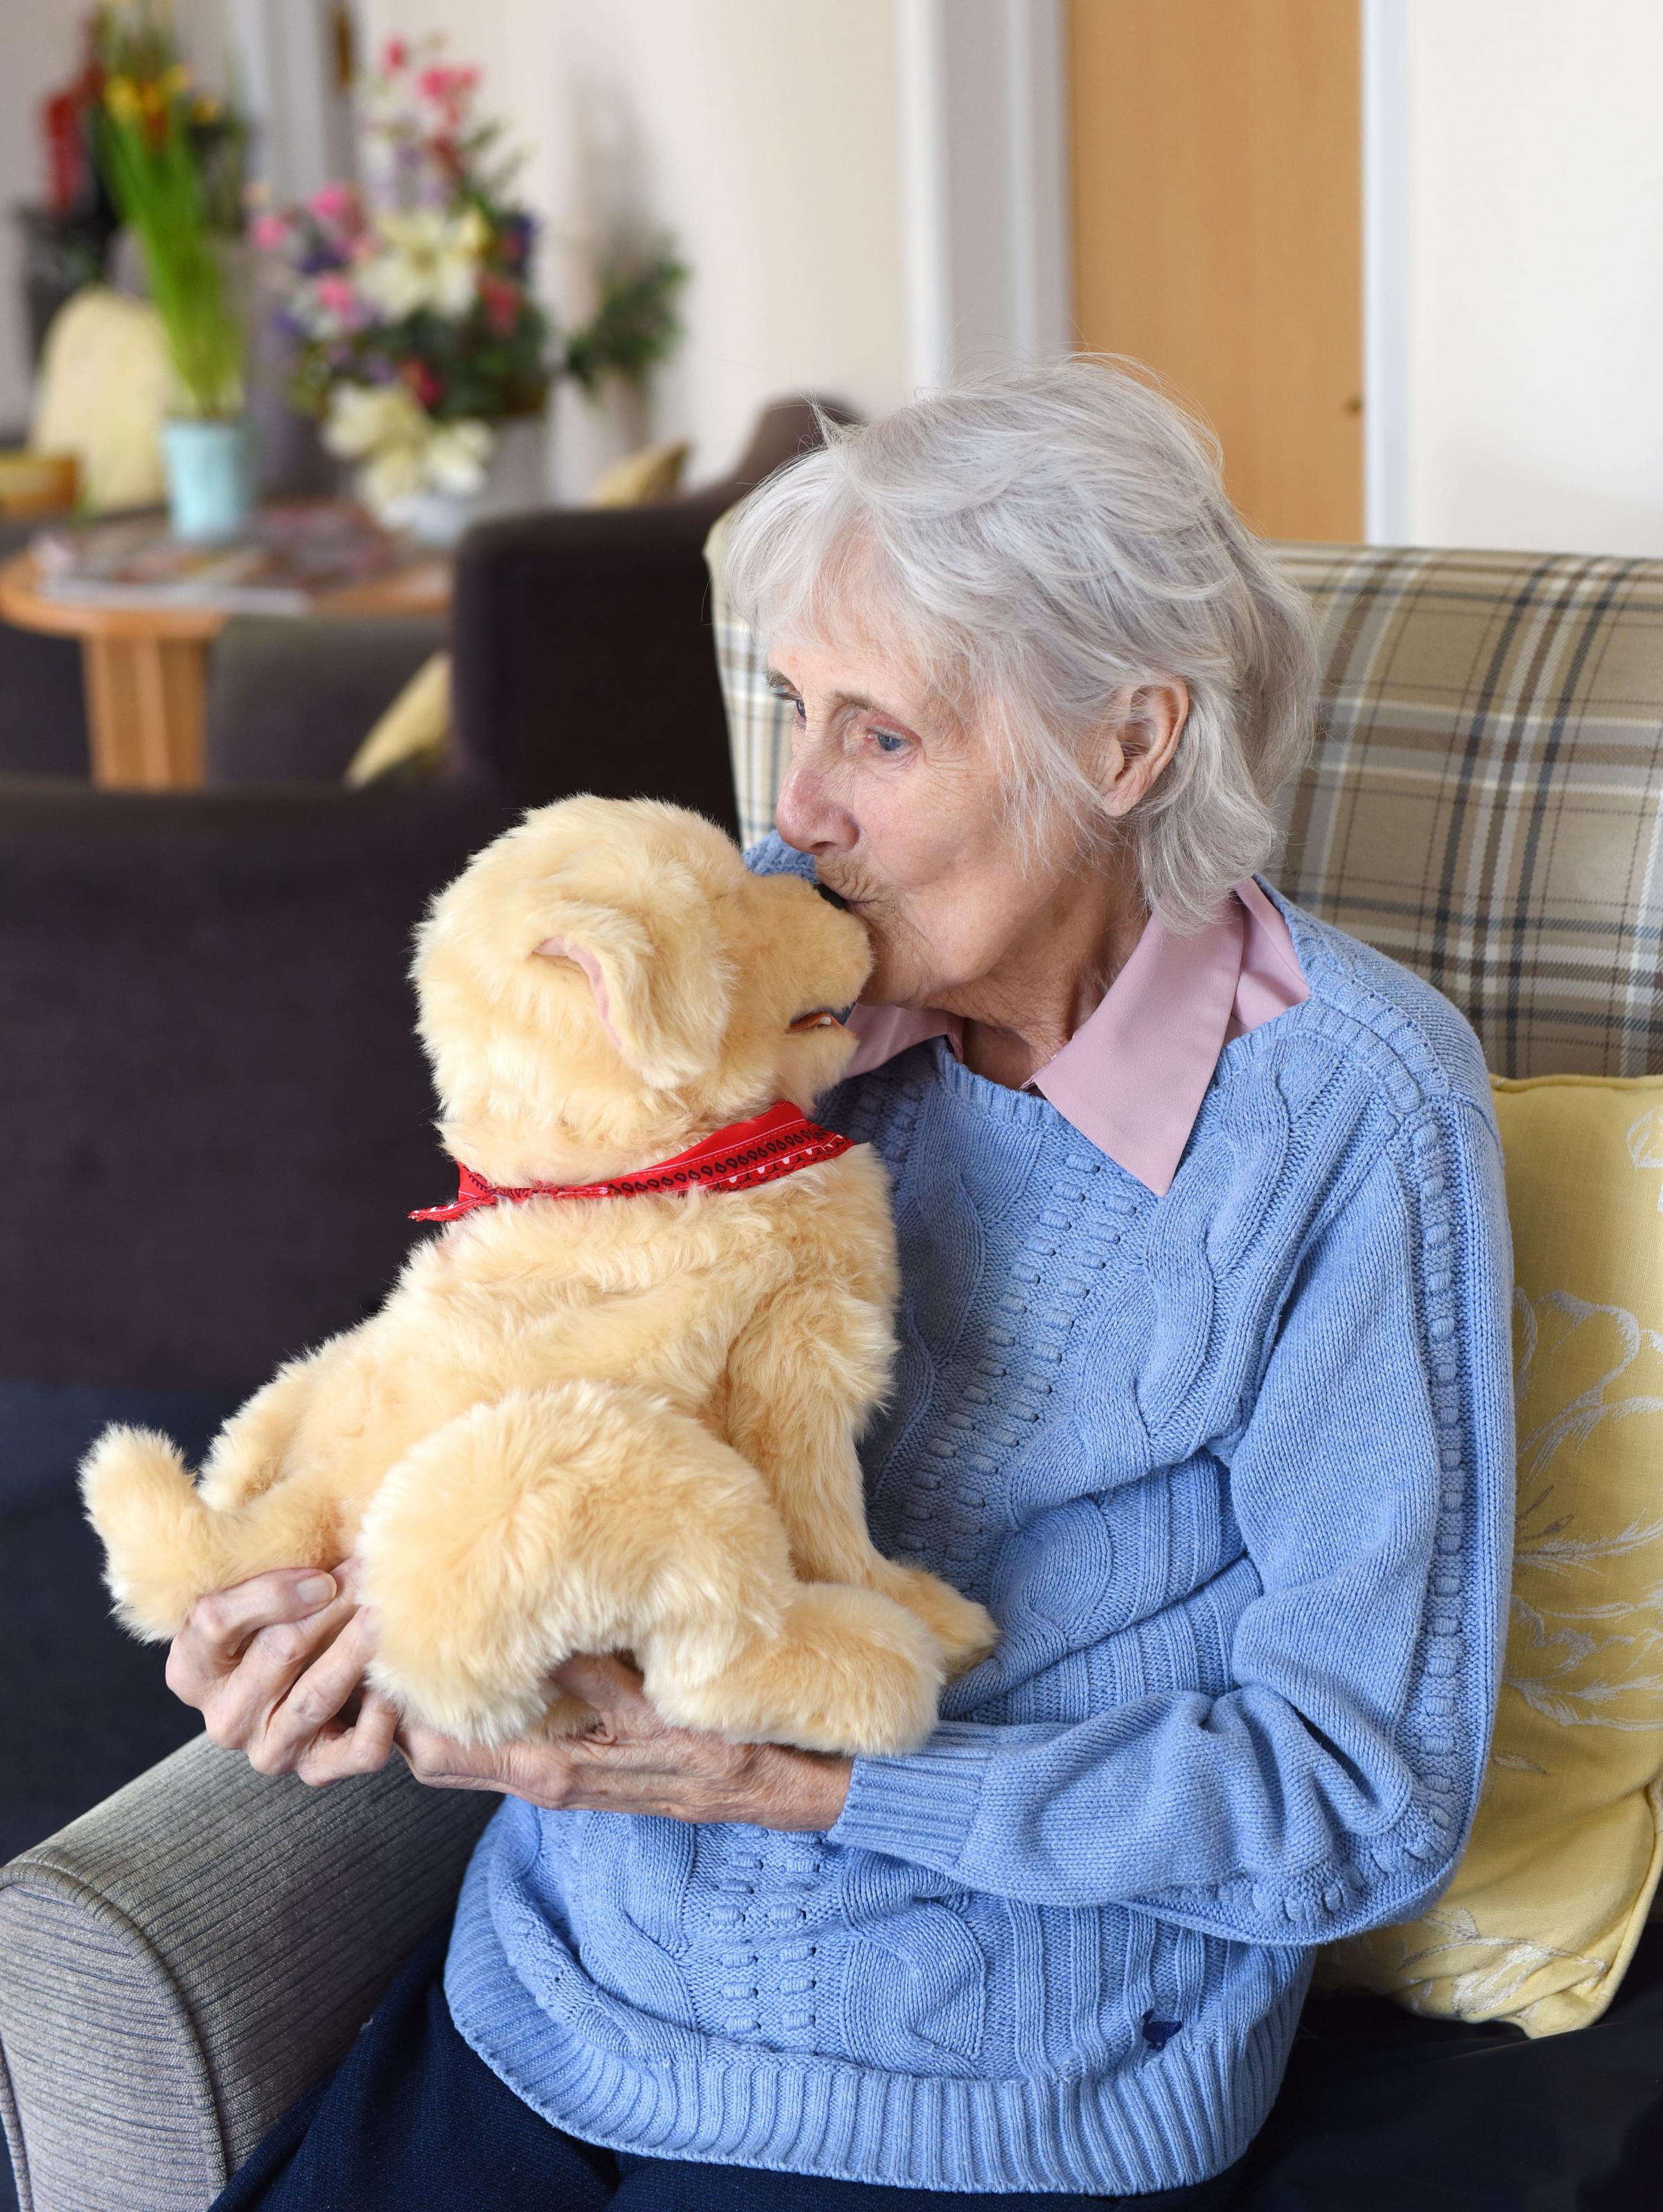 Ellen Ellinston, age 82, with the robotic therapy dog